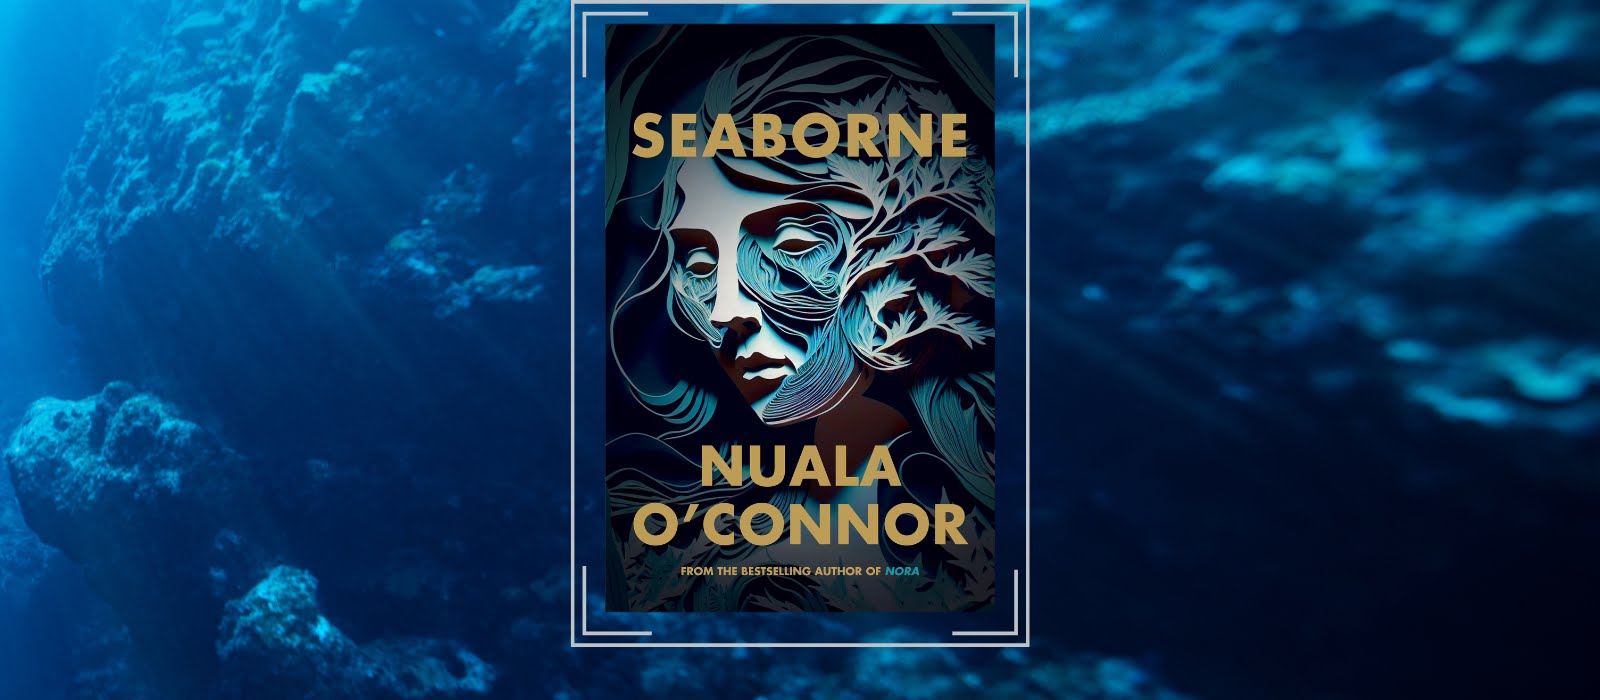 Read an extract from Nuala O’Connor’s new historical fiction, ‘Seaborne’